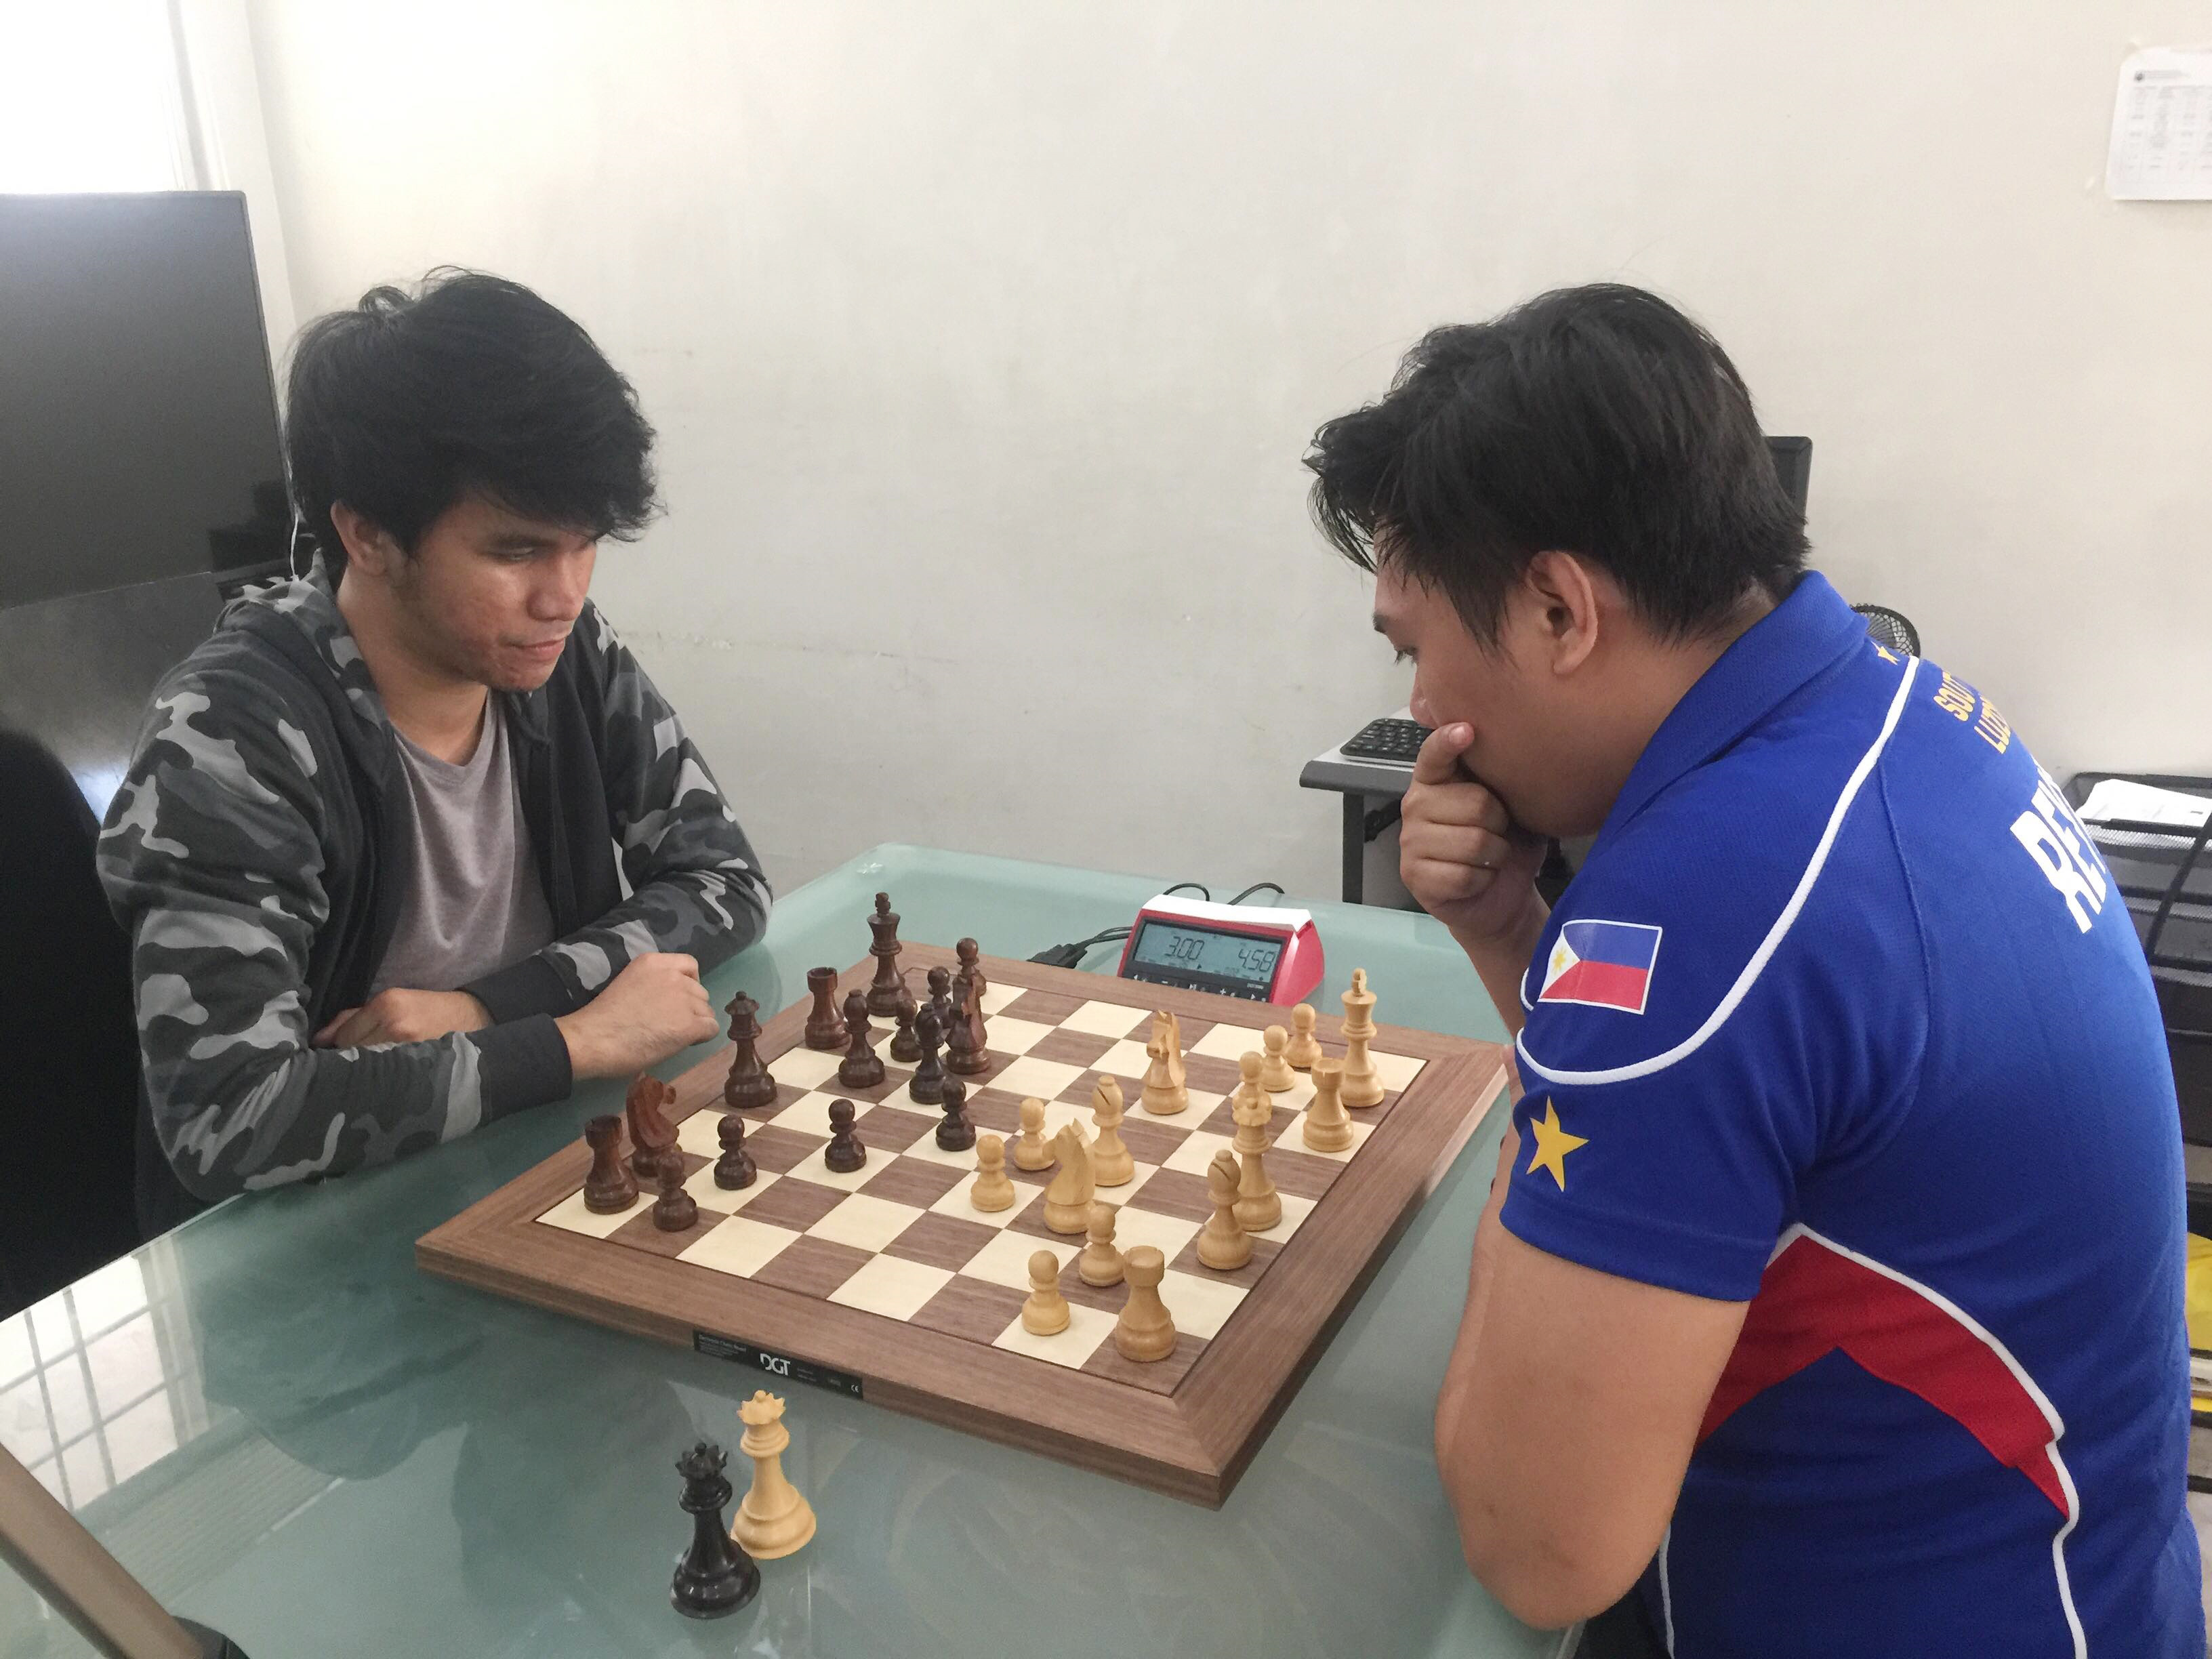 Photo shows from left to right the final match between Tyrone delos Santos of Knights of Columbus chess team versus Narguingel Reyes of Iglesia ni Cristo Chess Team during the National Chess Federation of the Philippines (NCFP) team tournament last Saturday, March 17, 2018. All games broadcast live worldwide through the Youtube channel of the National Chess Federation of the Philippines (NCFP).